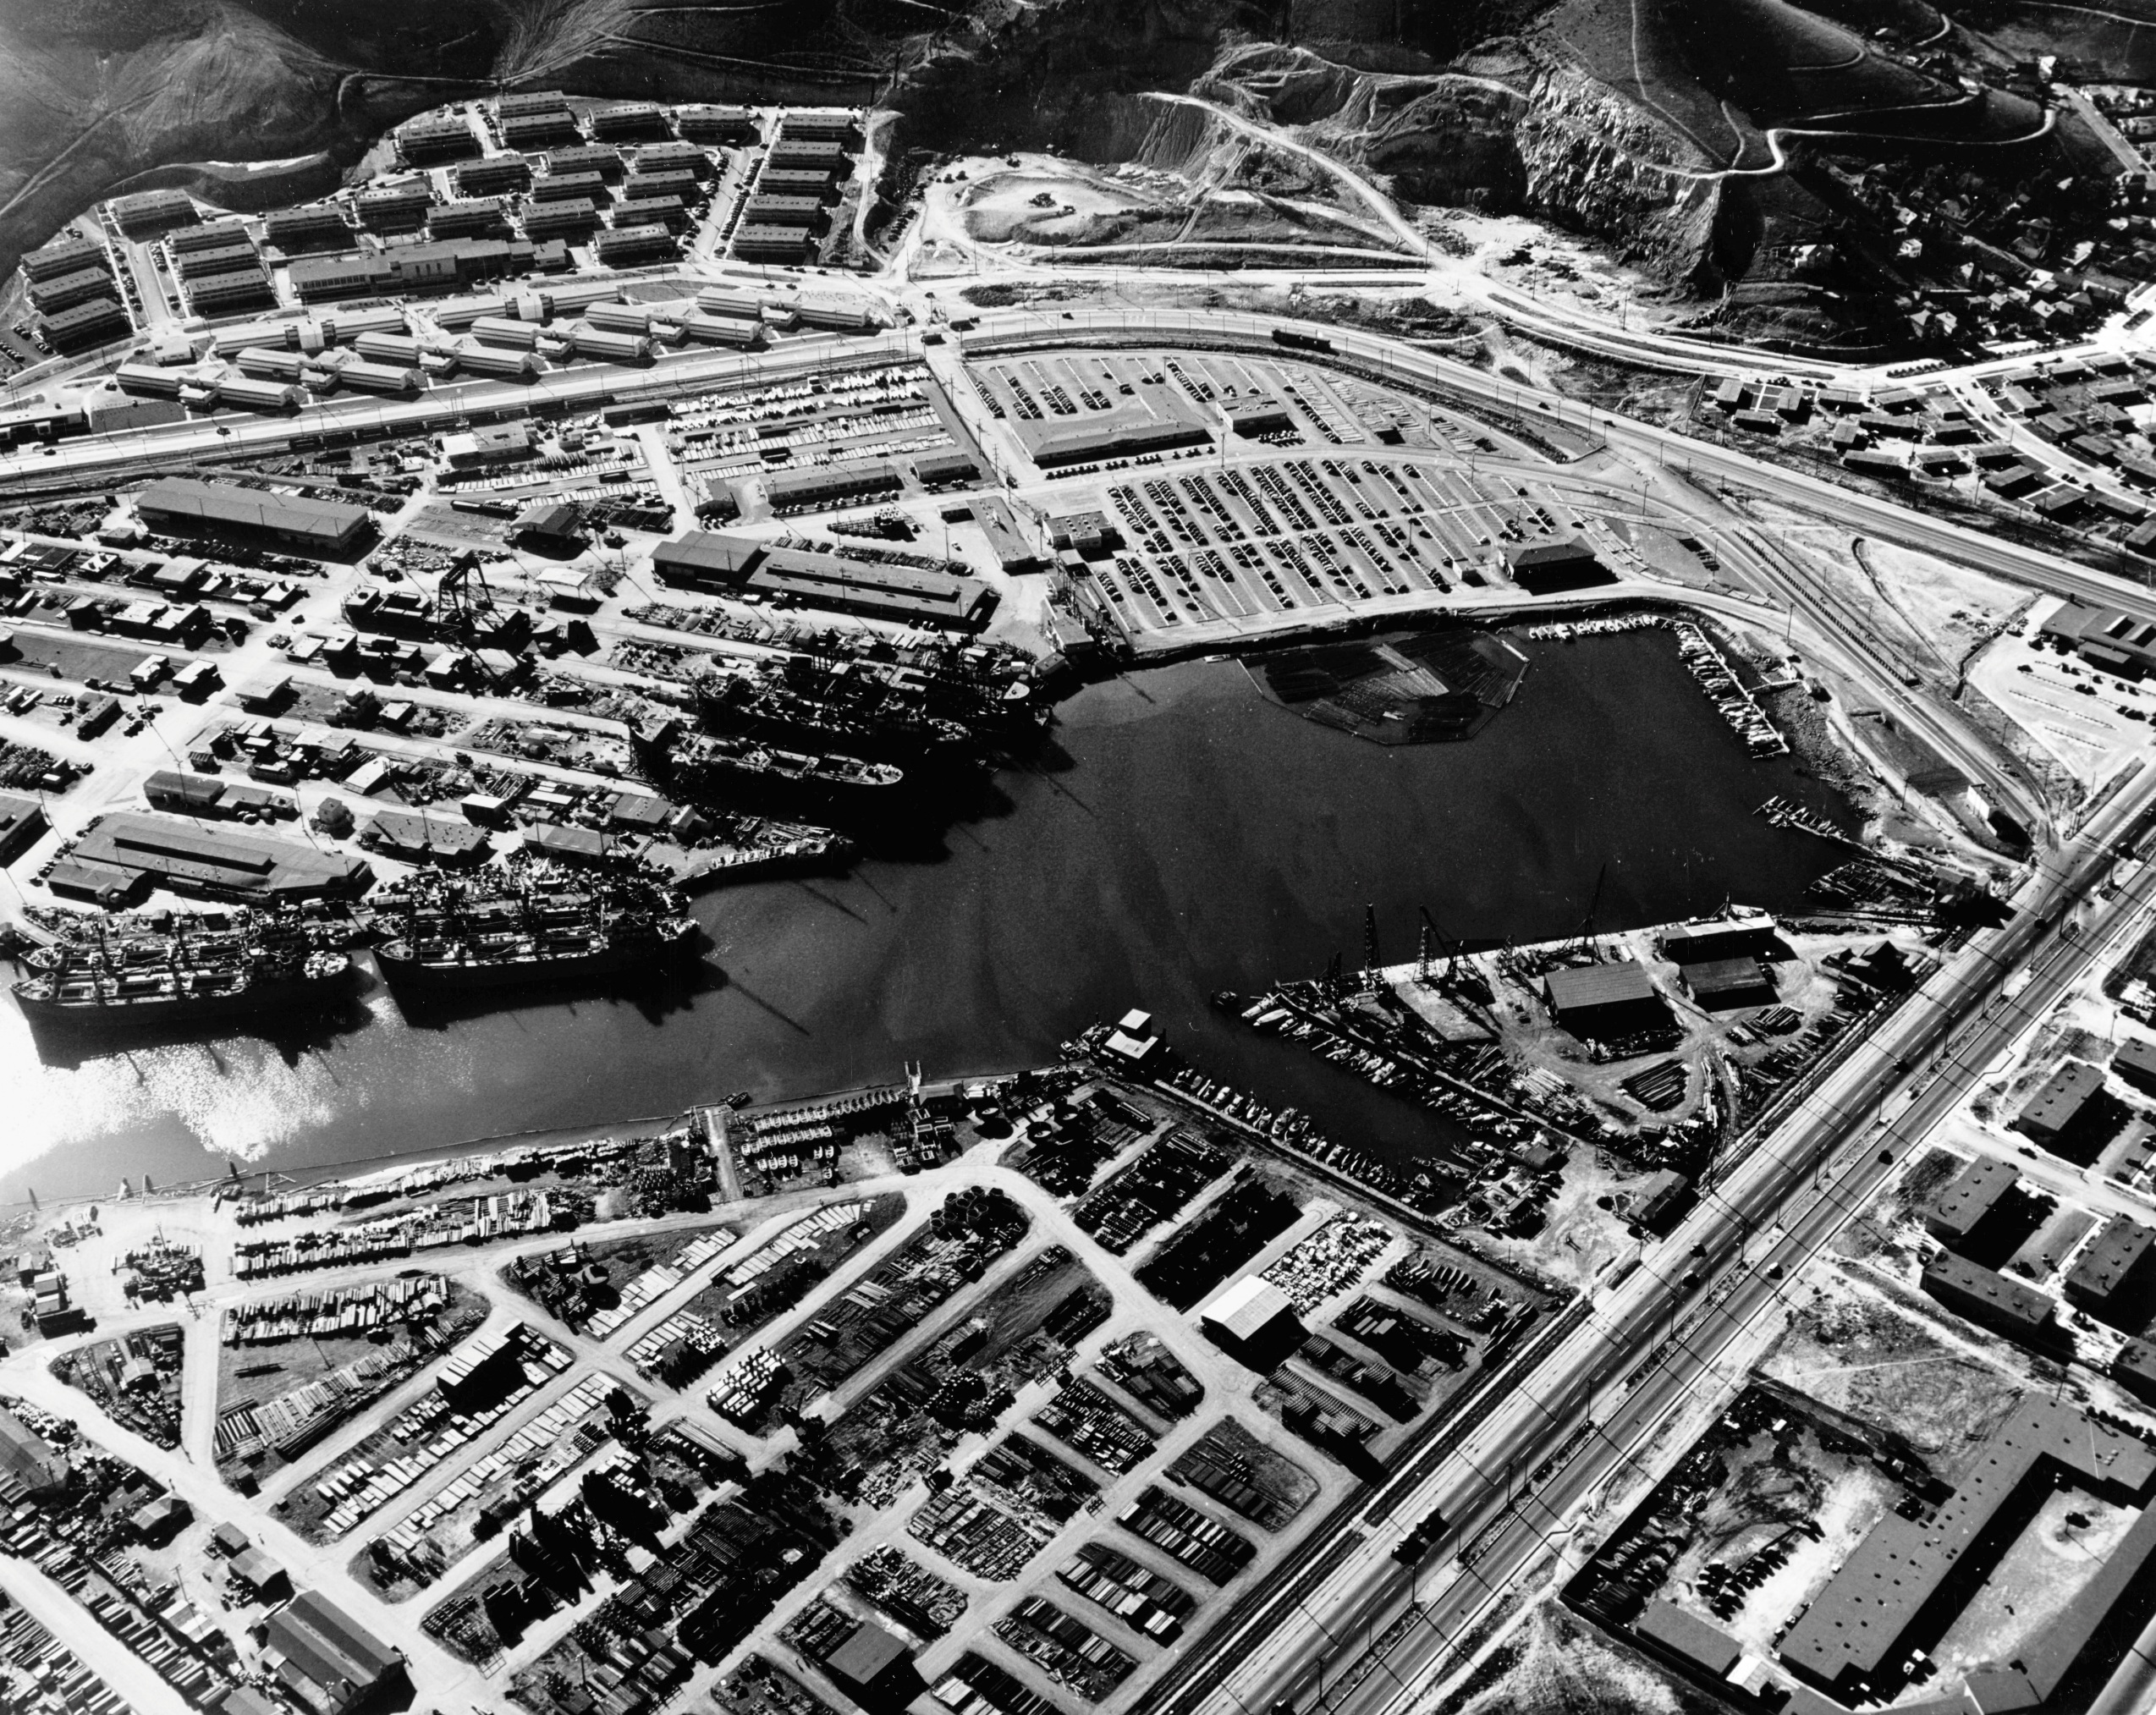 Aerial view of the Kaiser Company Shipyard No. 4 looking southwest, Richmond, California, United States, 6 Dec 1944.